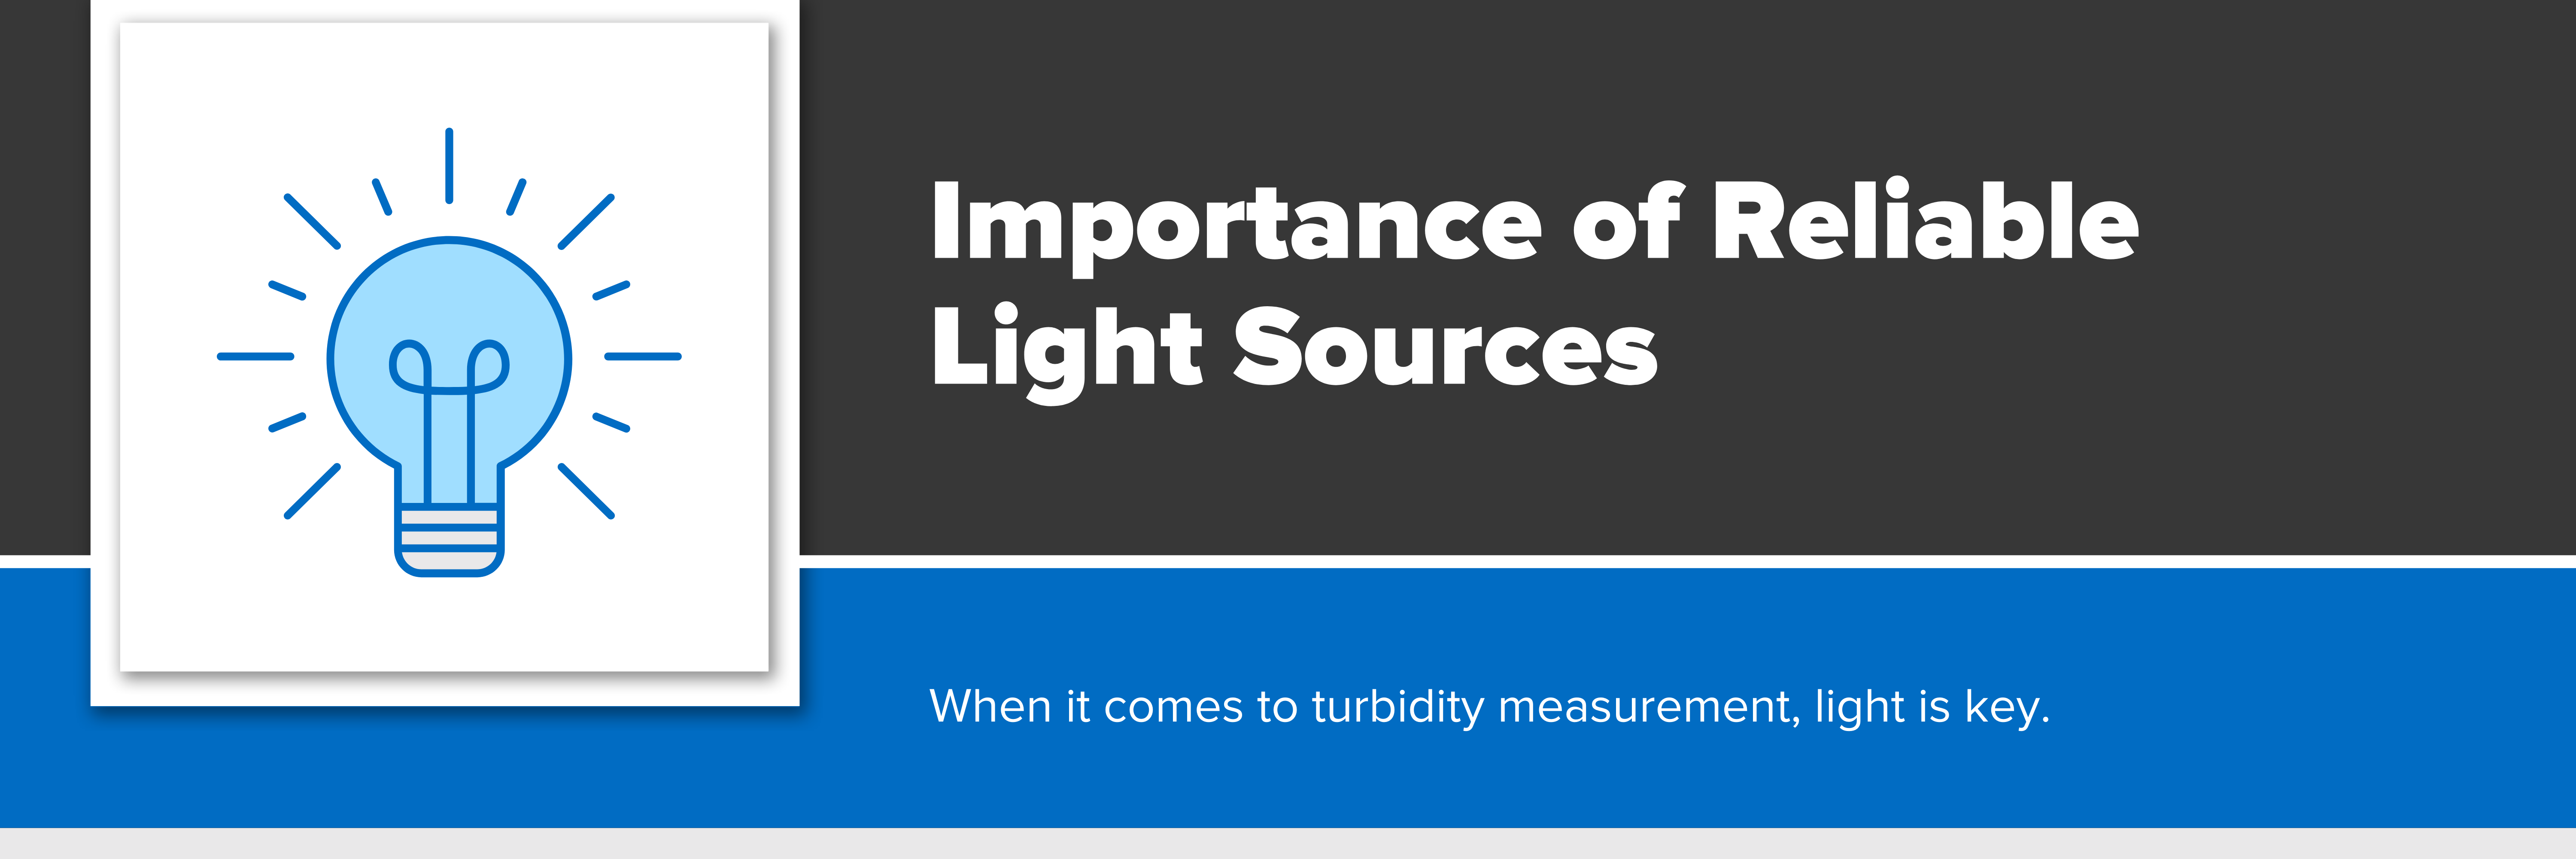 Header image with text "Importance of Reliable Light Sources"